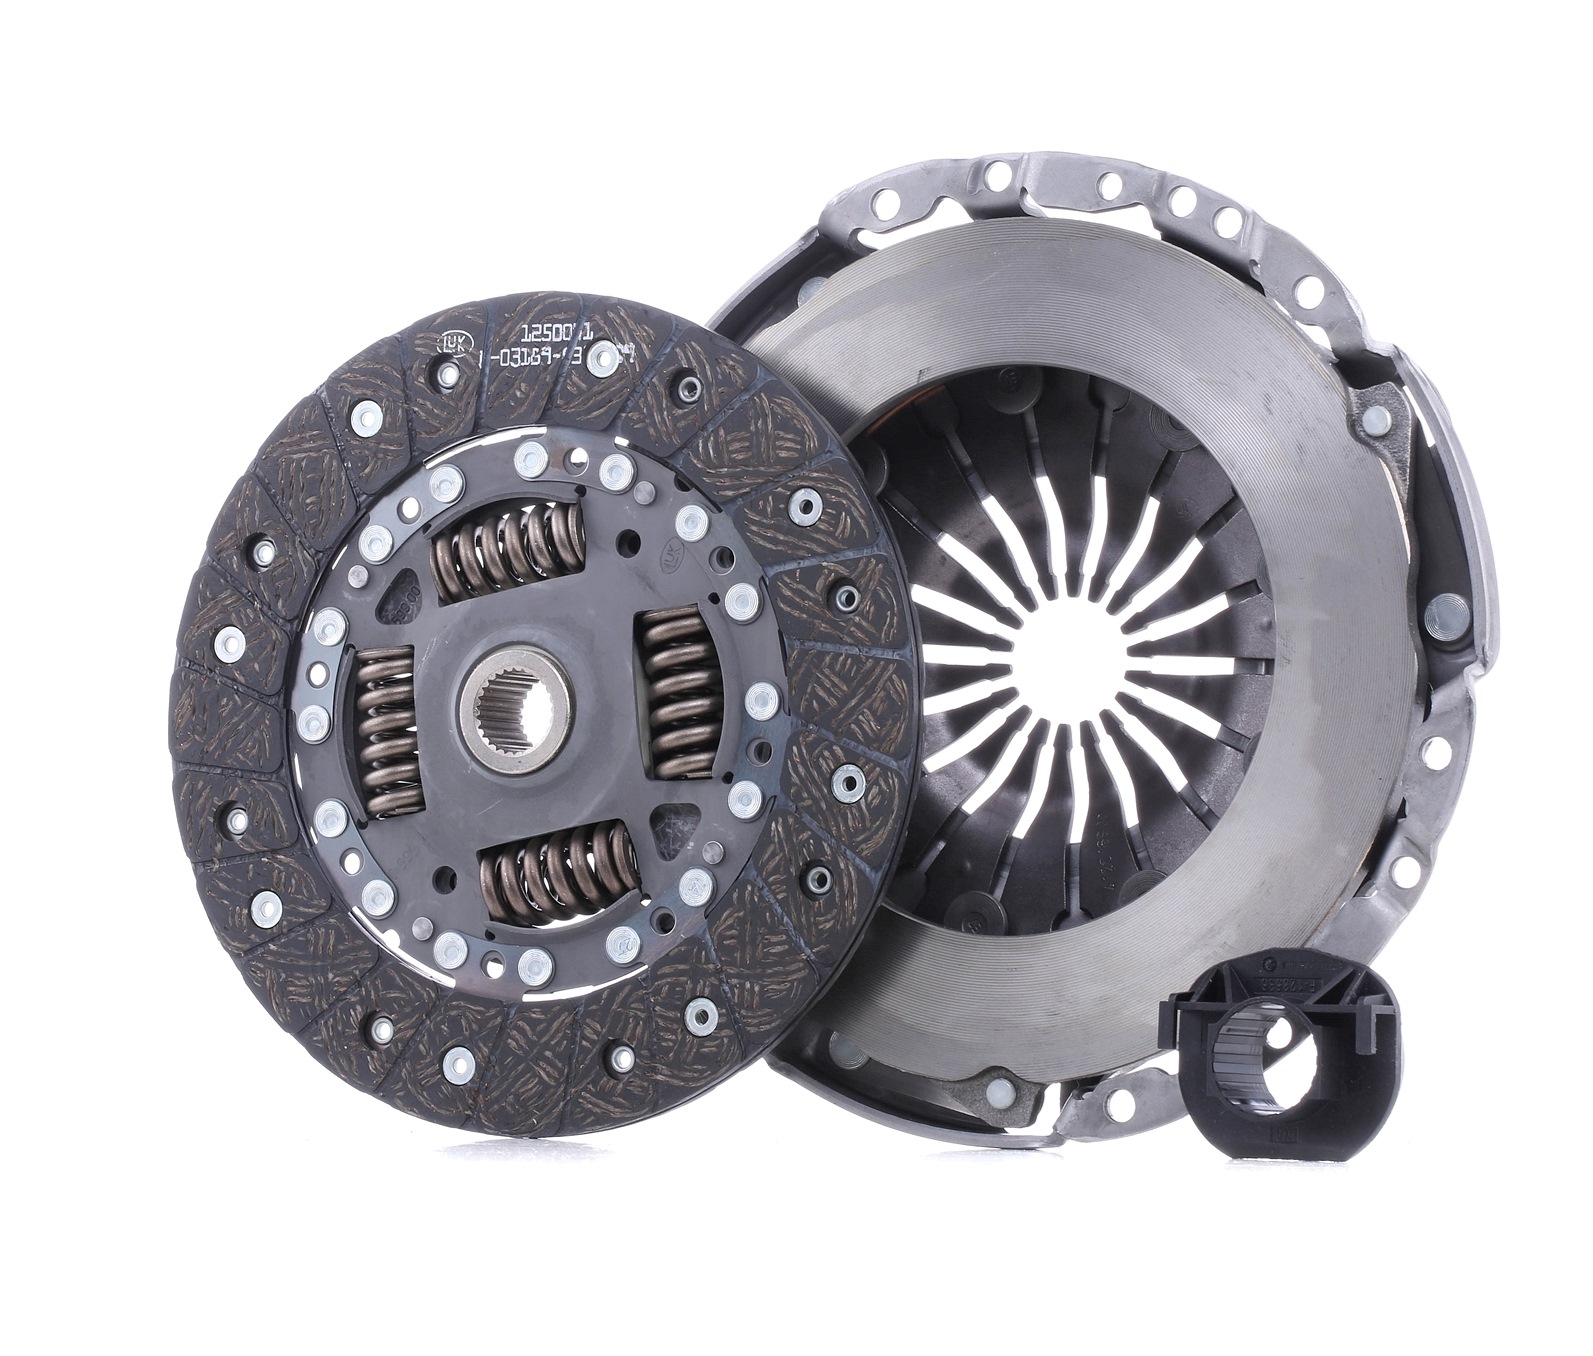 LuK BR 0222 622 2281 00 Clutch kit with clutch release bearing, with clutch disc, 220mm